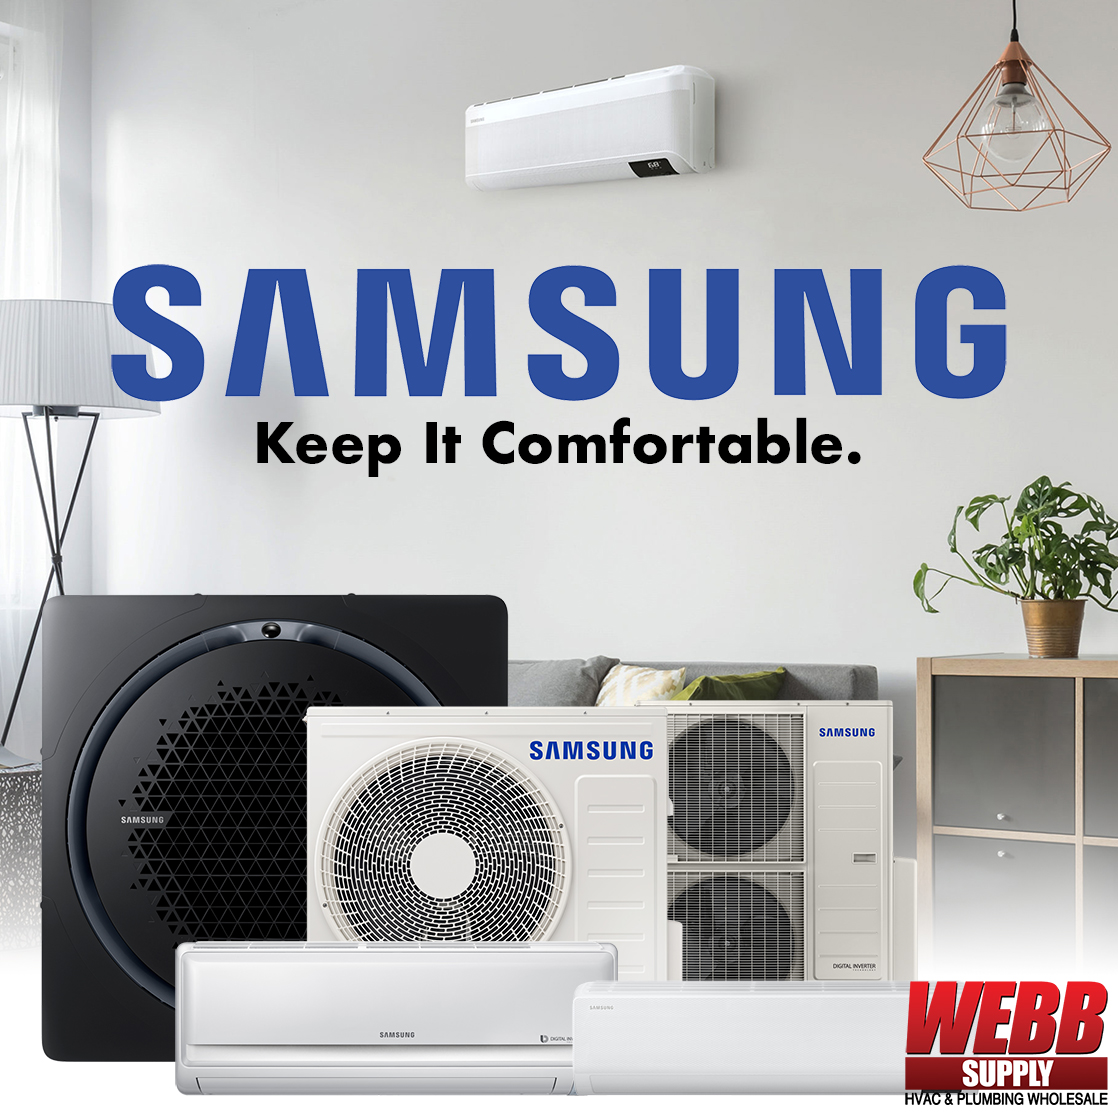 Webb Supply has the @SamsungHVAC_NA Mini Split equipment you need to keep your customers comfortable. Shop our selection of Single zone or FJM products today! Want to learn more? Sign up for our training classes in February! webbsupply.com/training/

#hvac #minisplit #samsunghvac